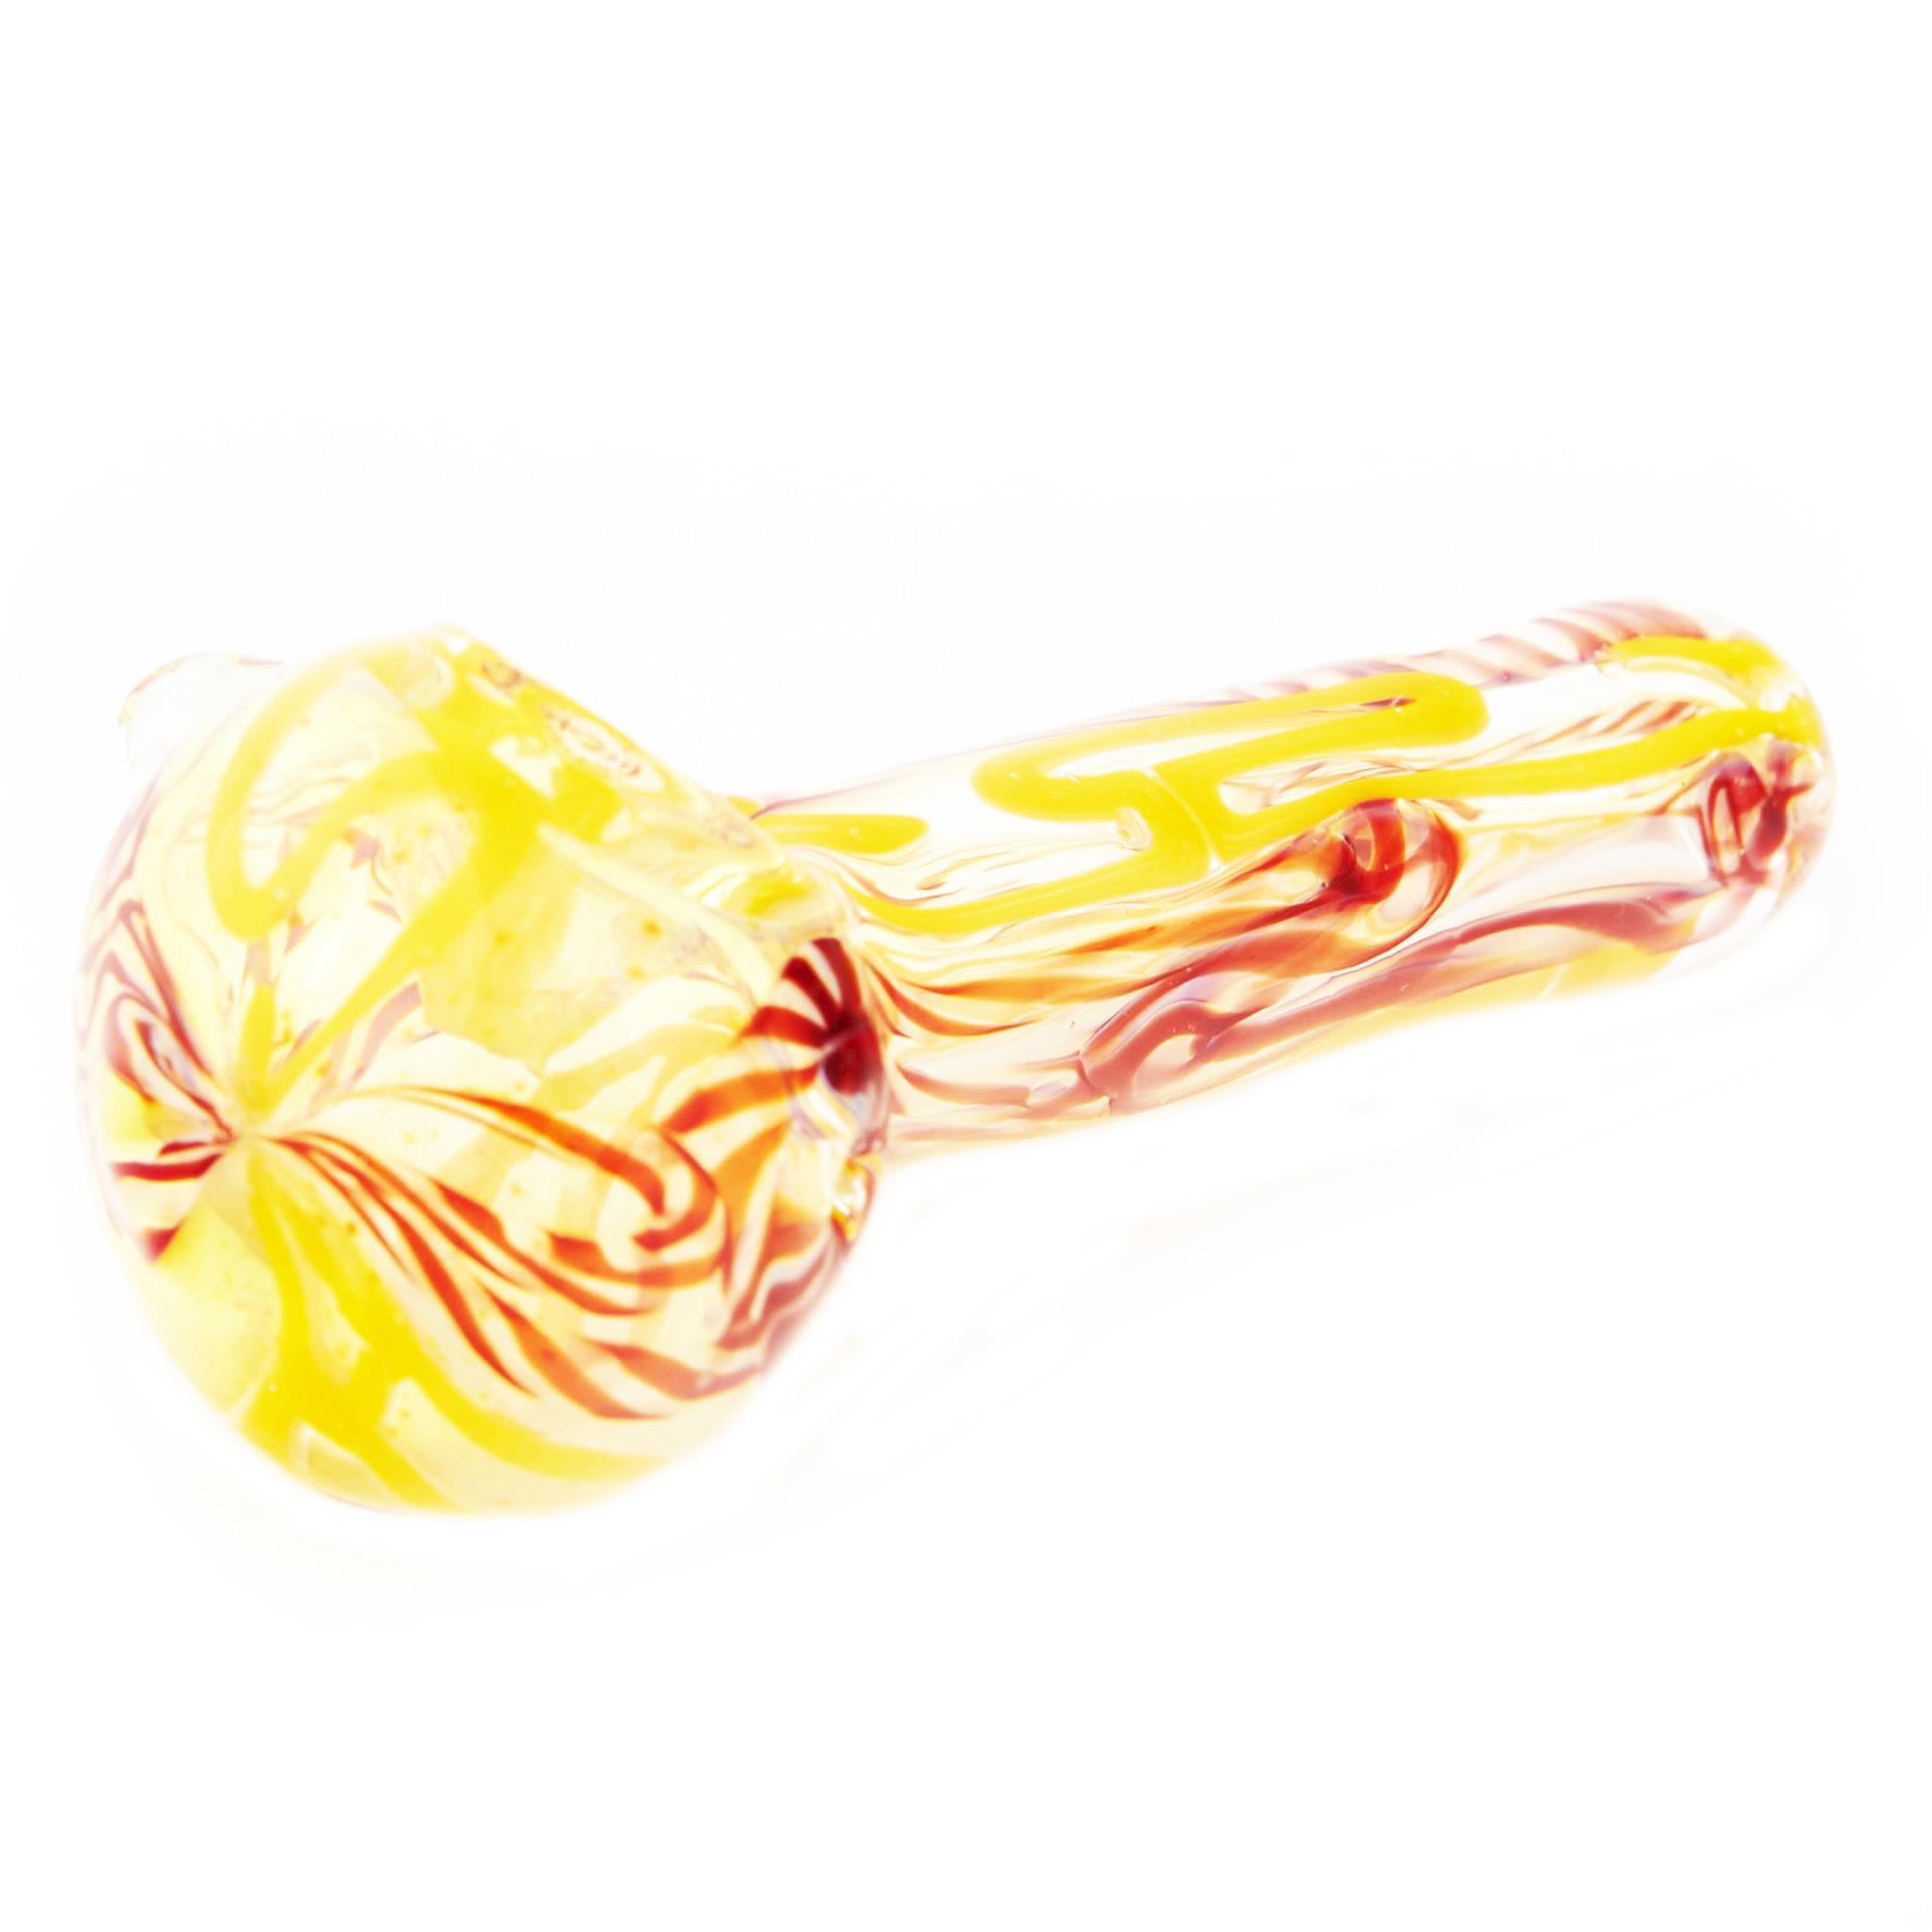 POT OF GOLD SPOON PIPE